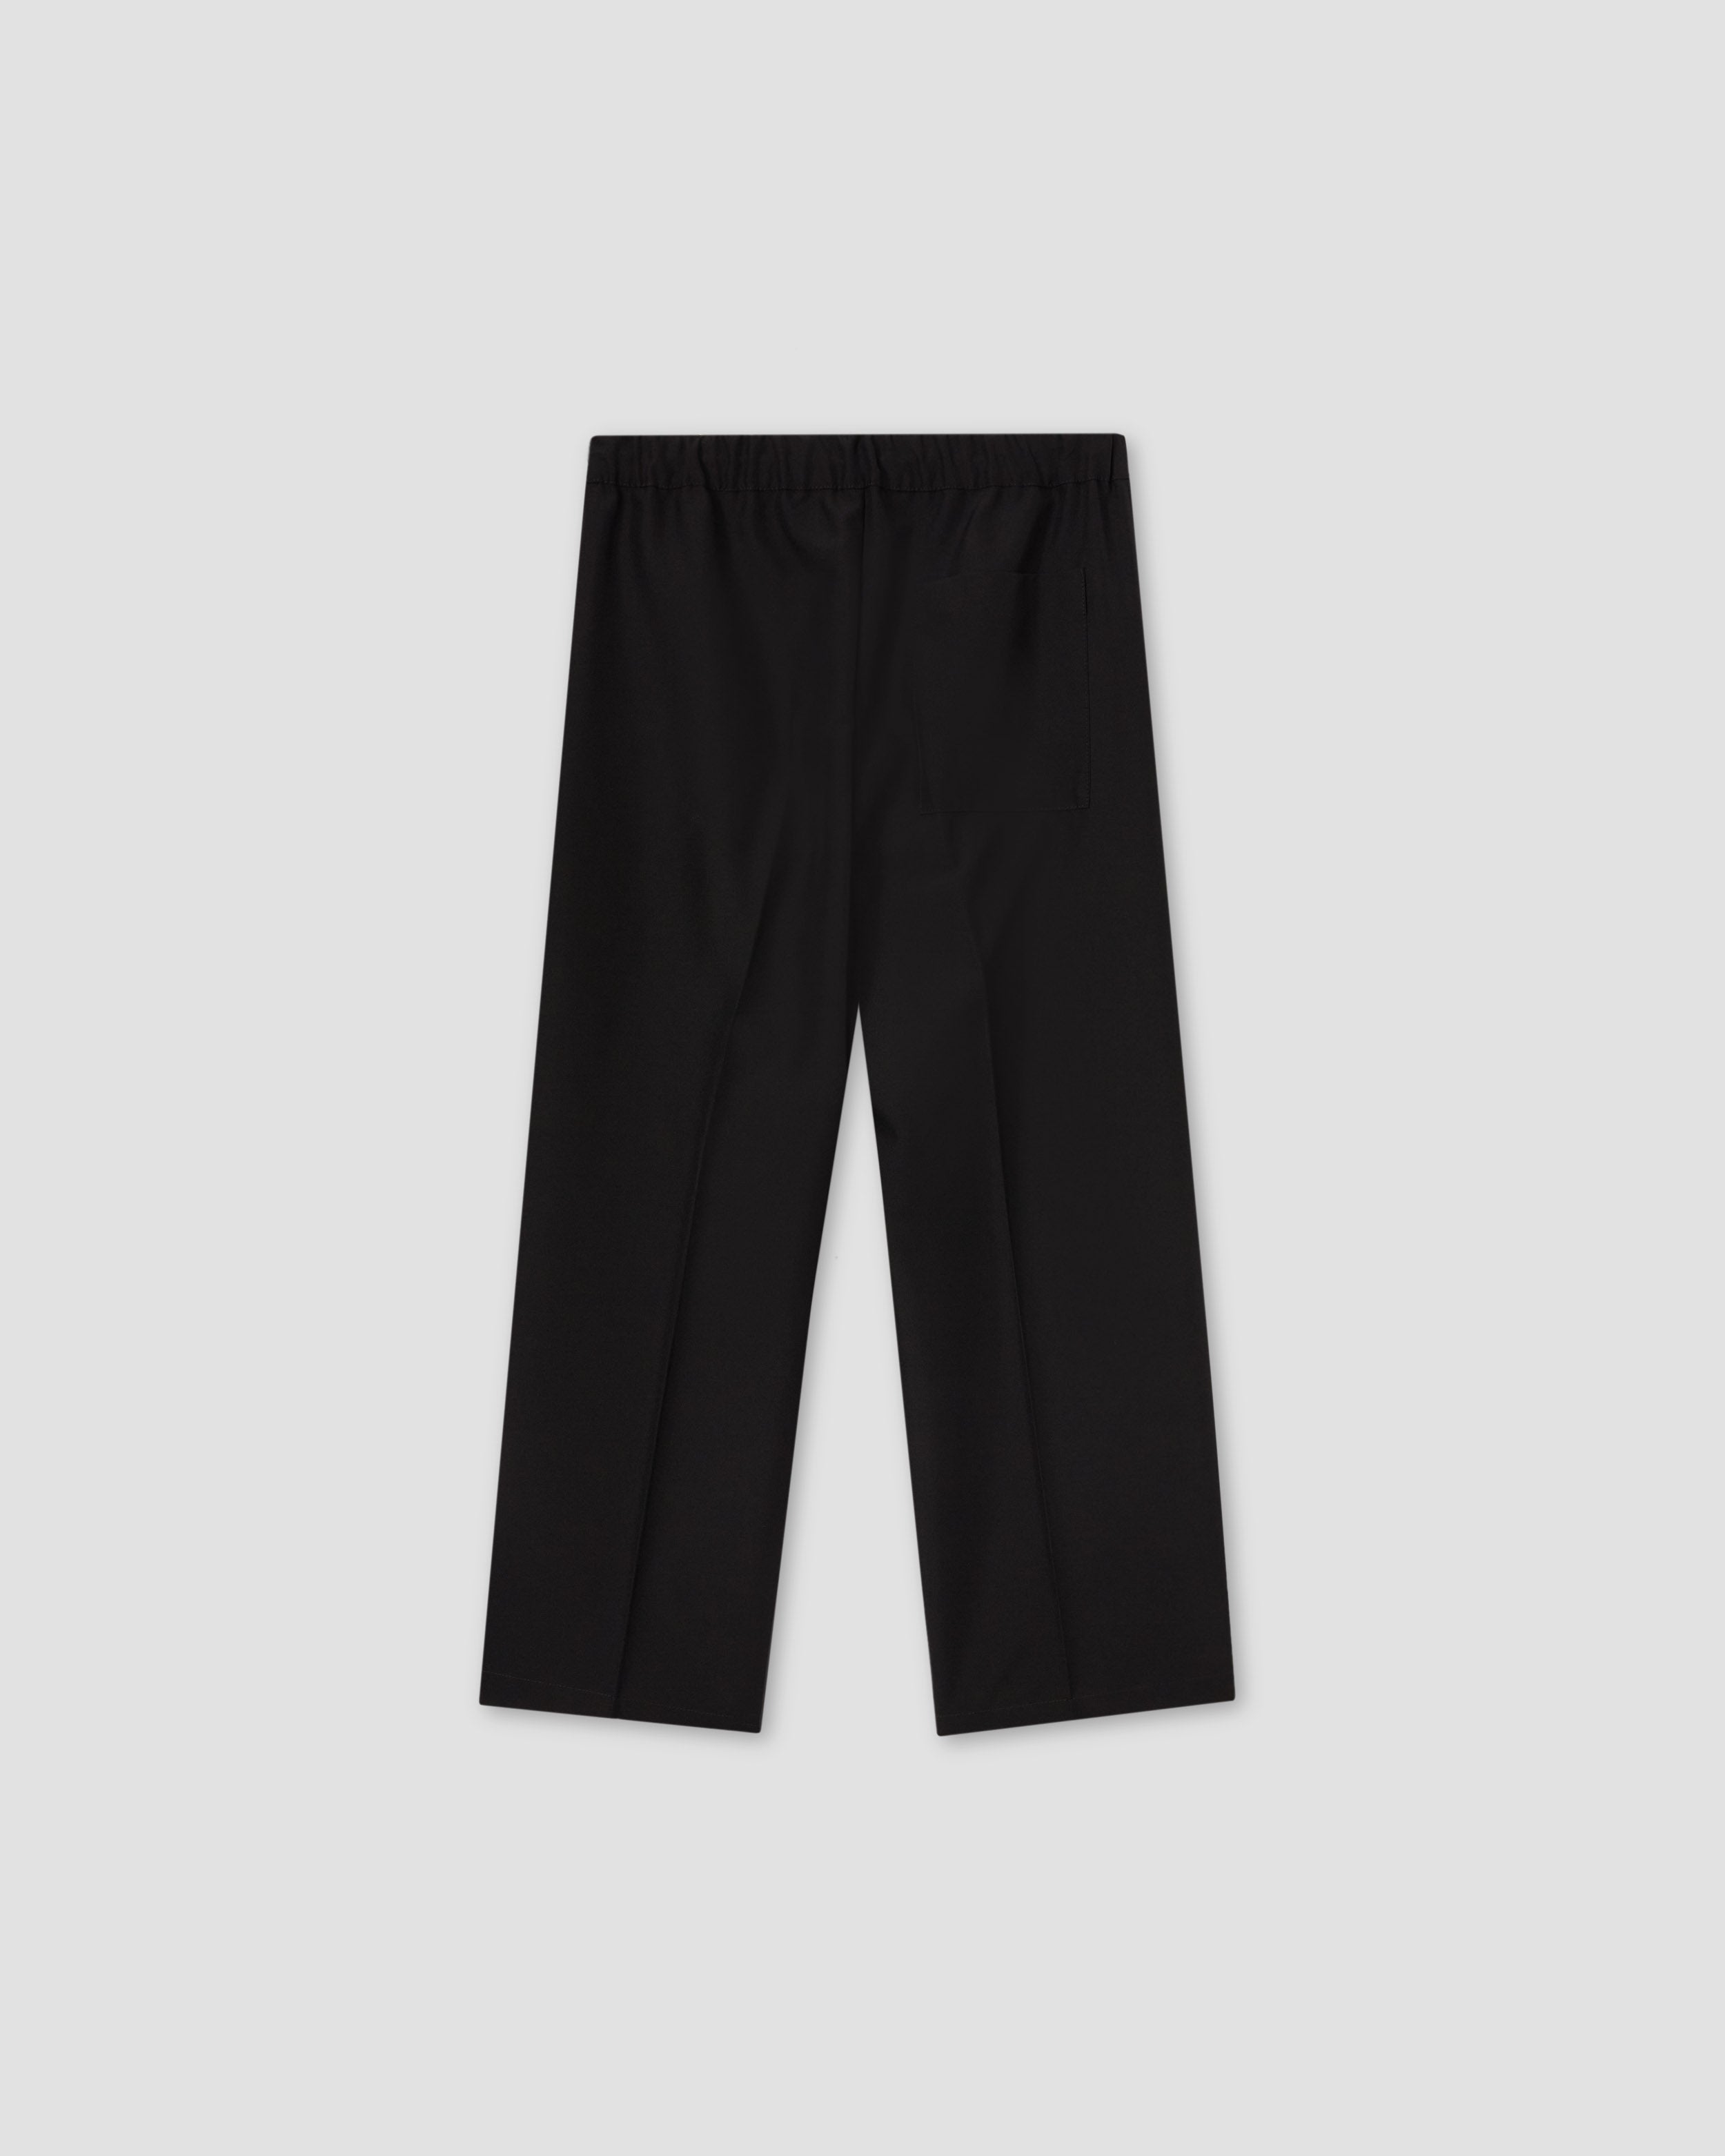 BASE TROUSERS